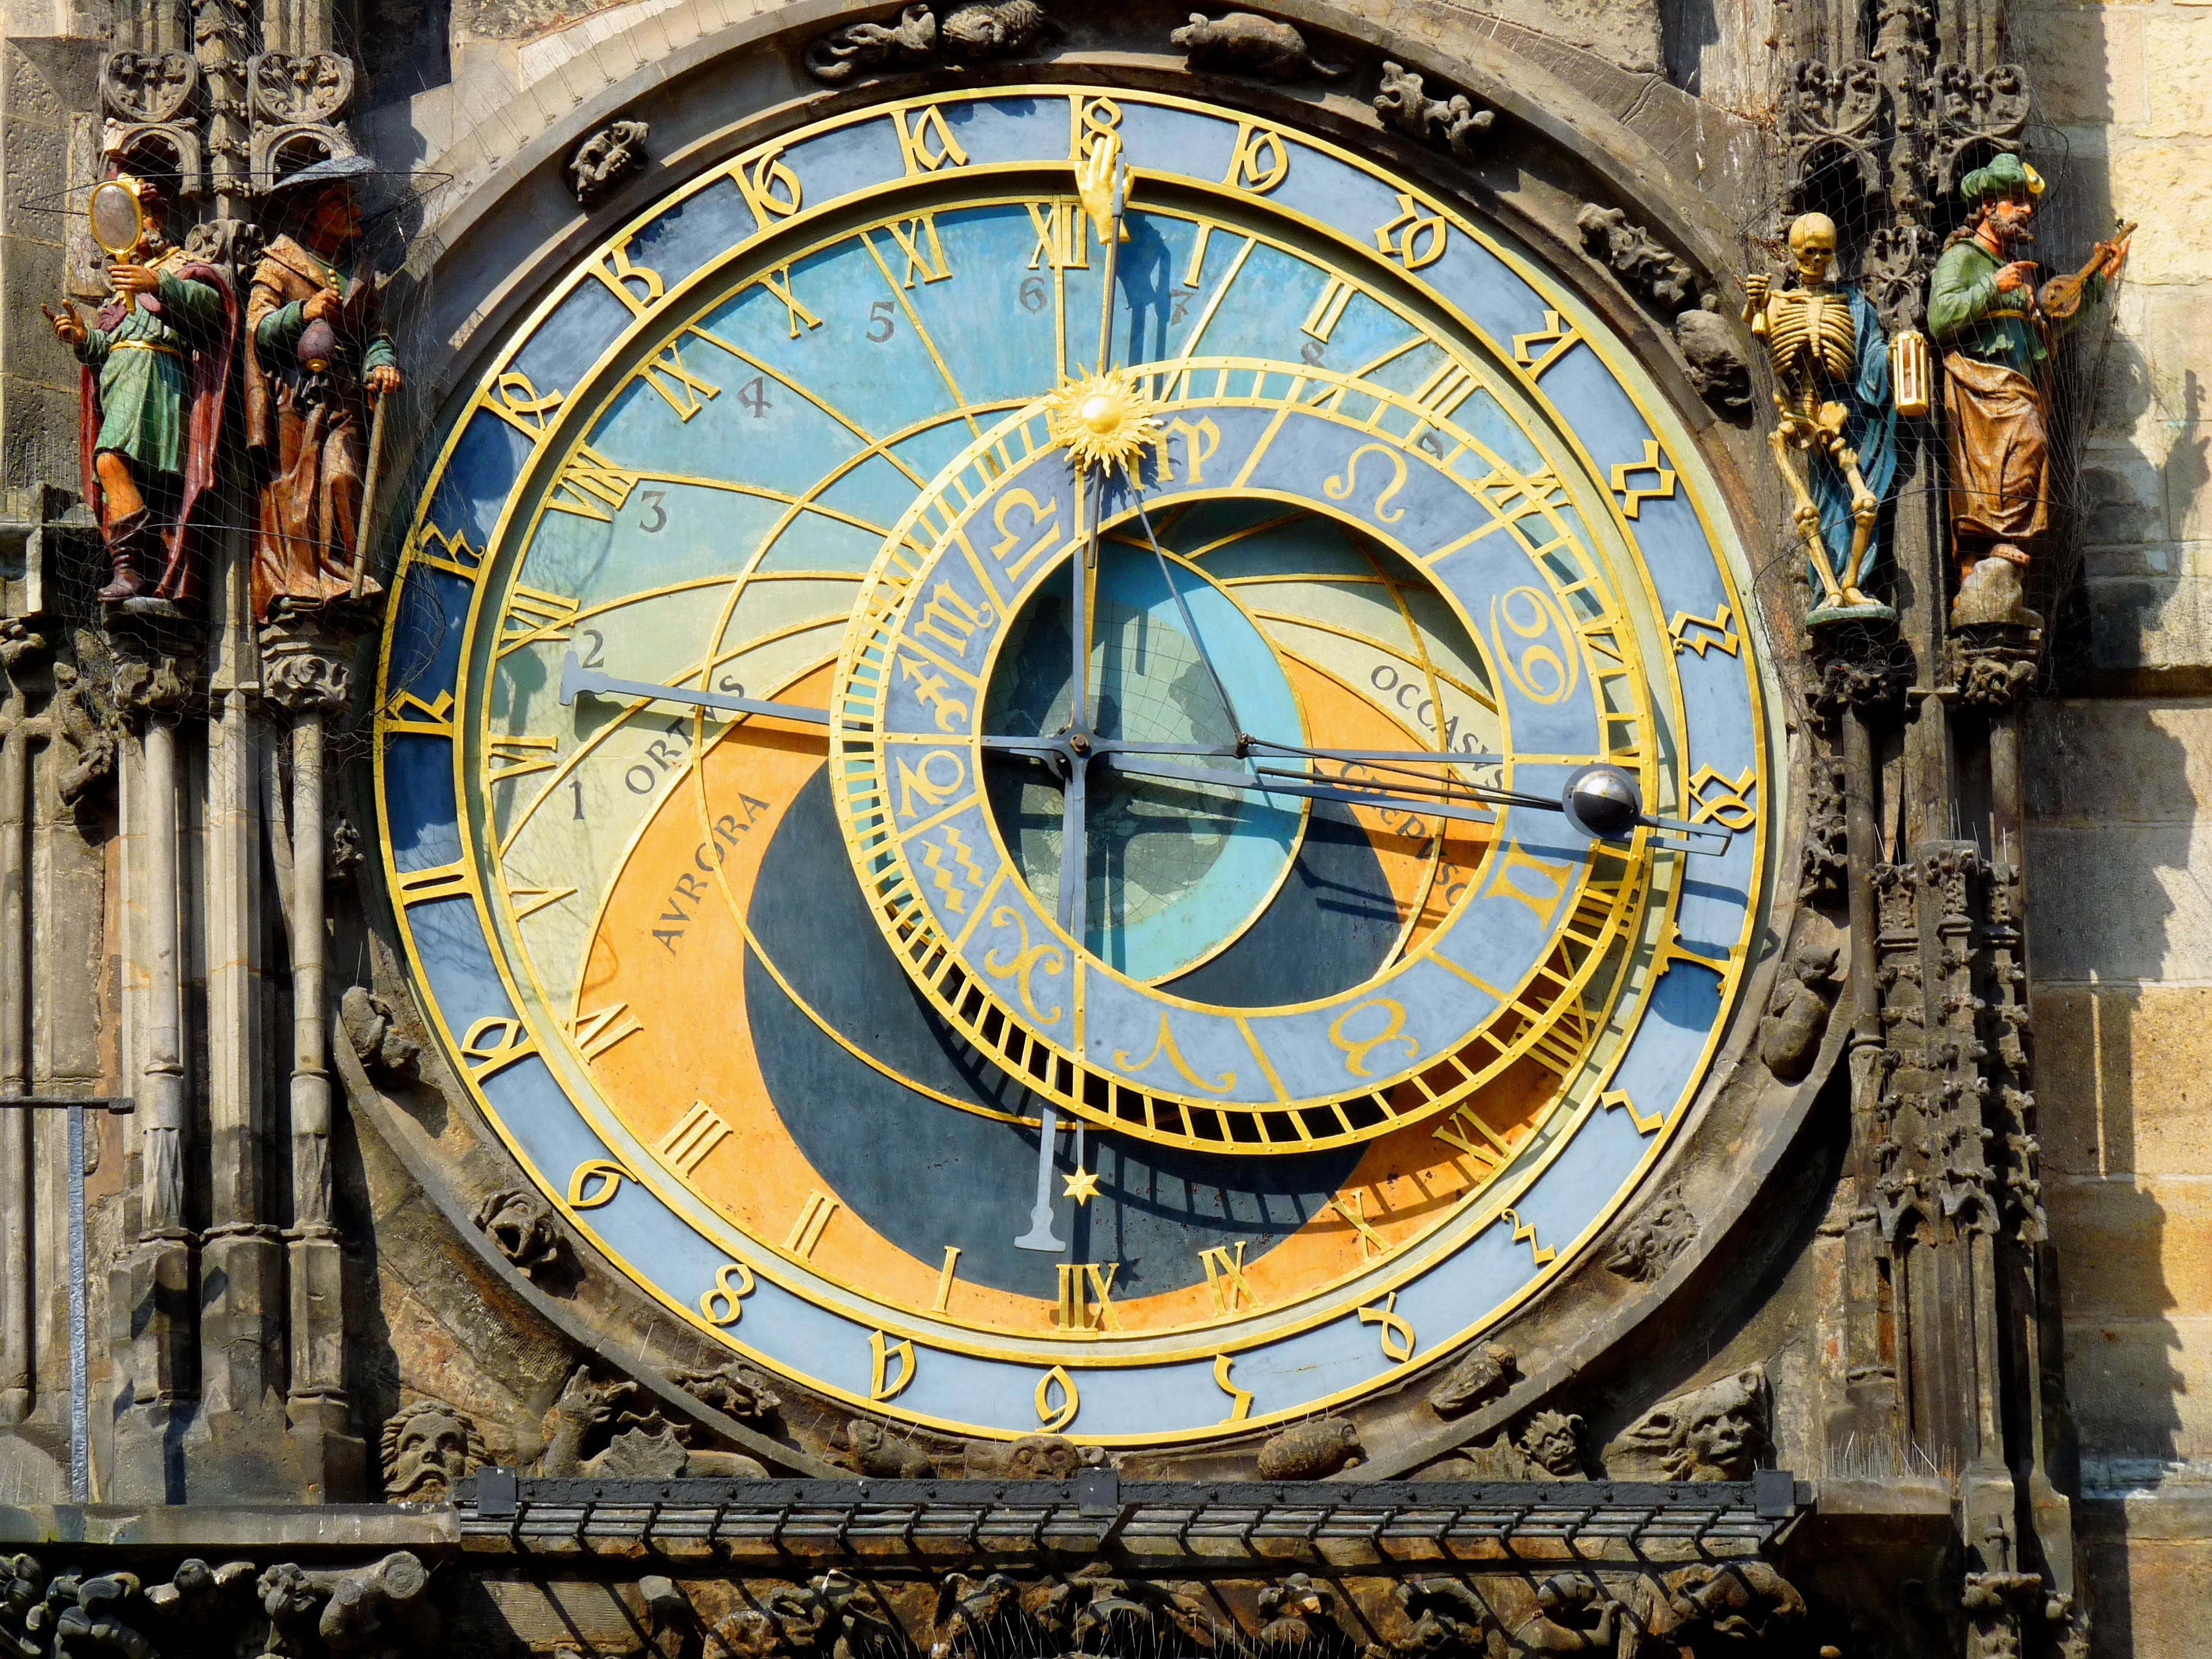 Prague, Old Town, Astronomical Clock, watches, astronomical Clock - Prague